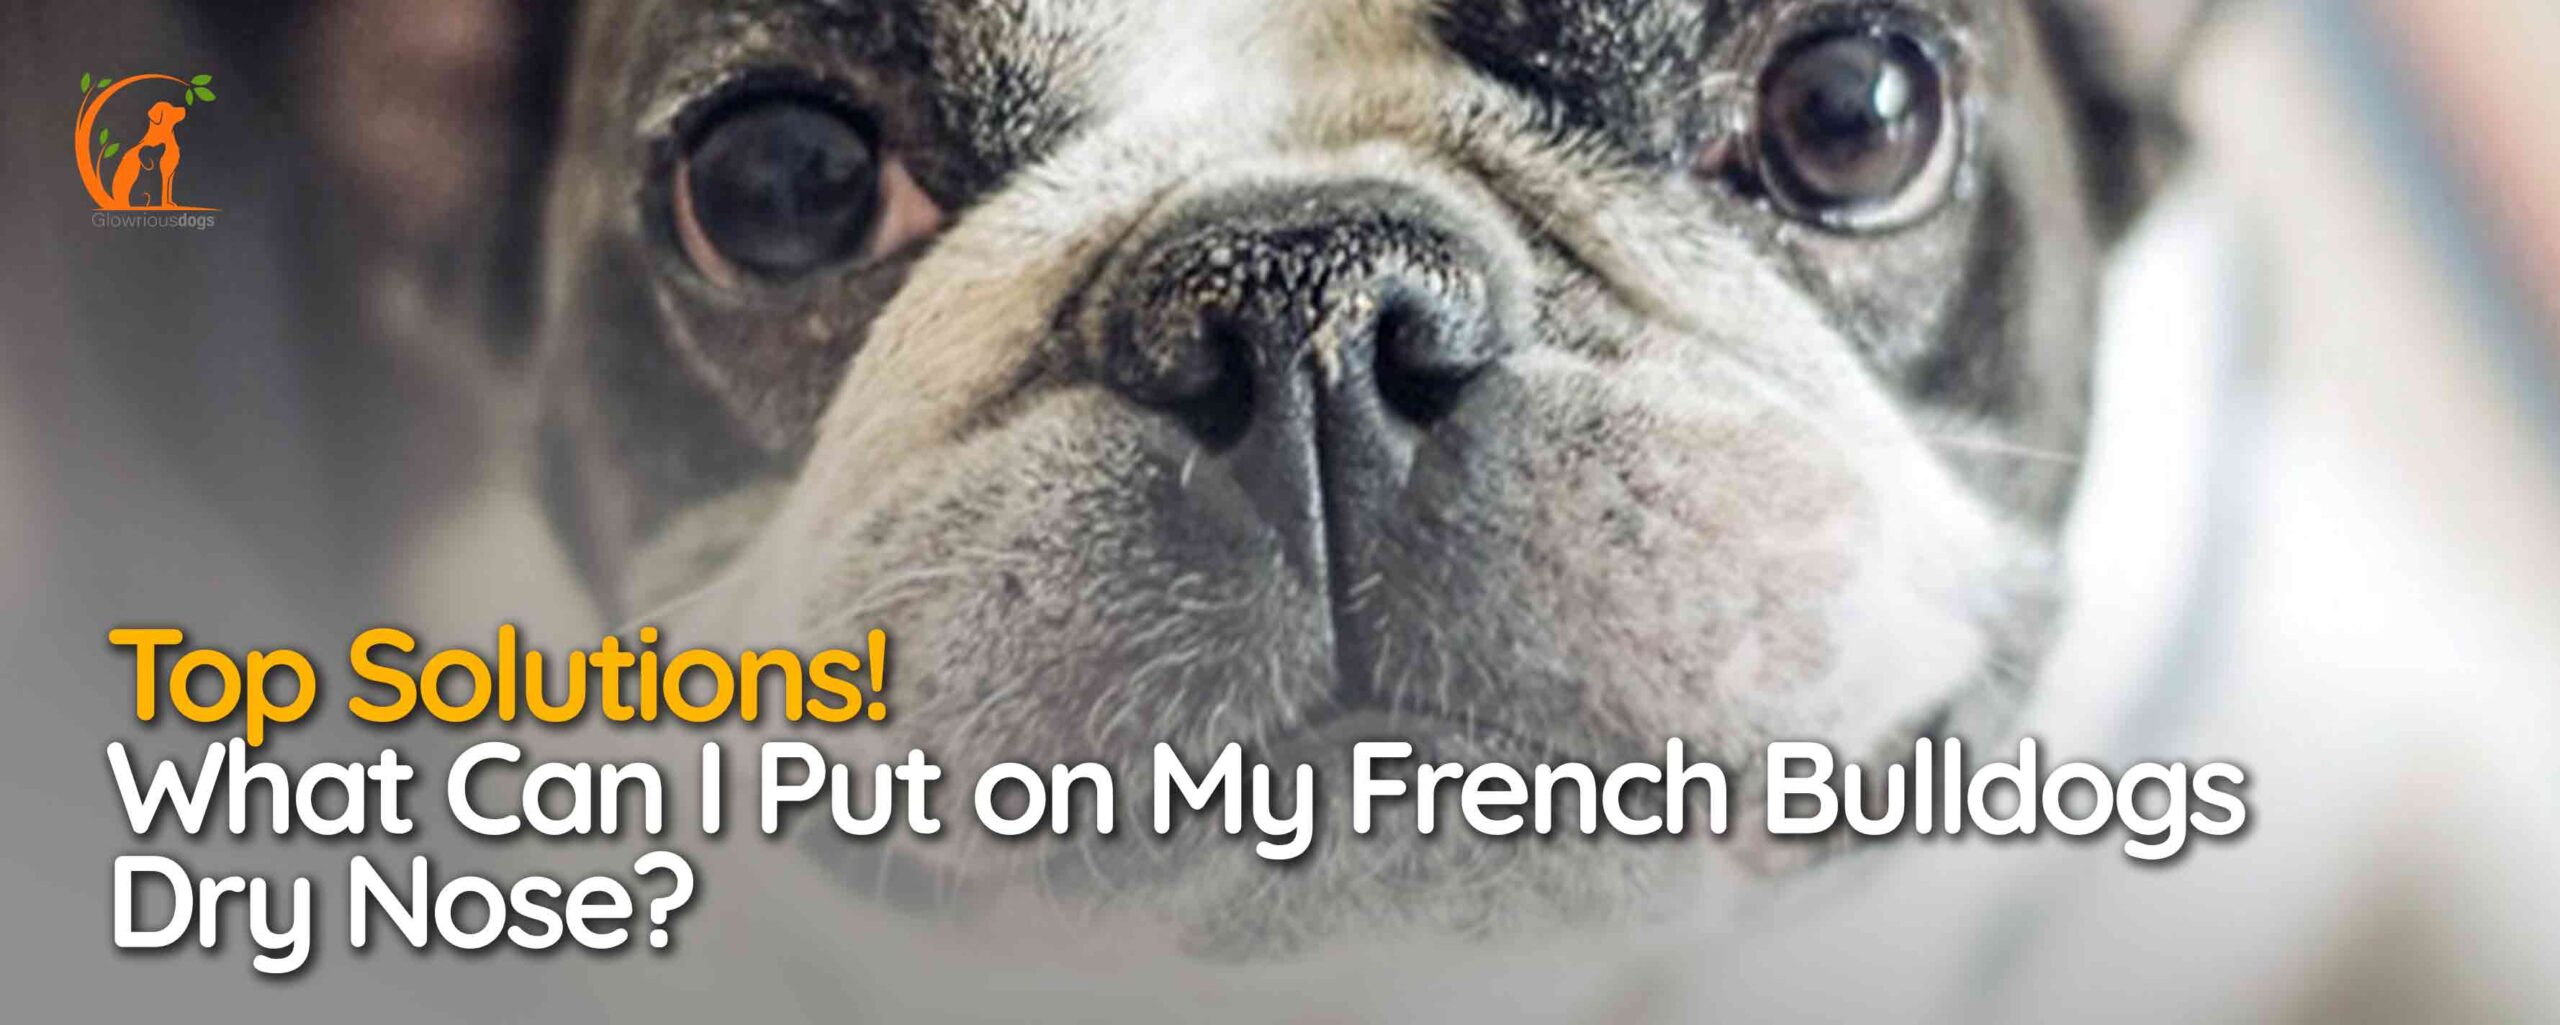 What Can I Put on My French Bulldogs Dry Nose